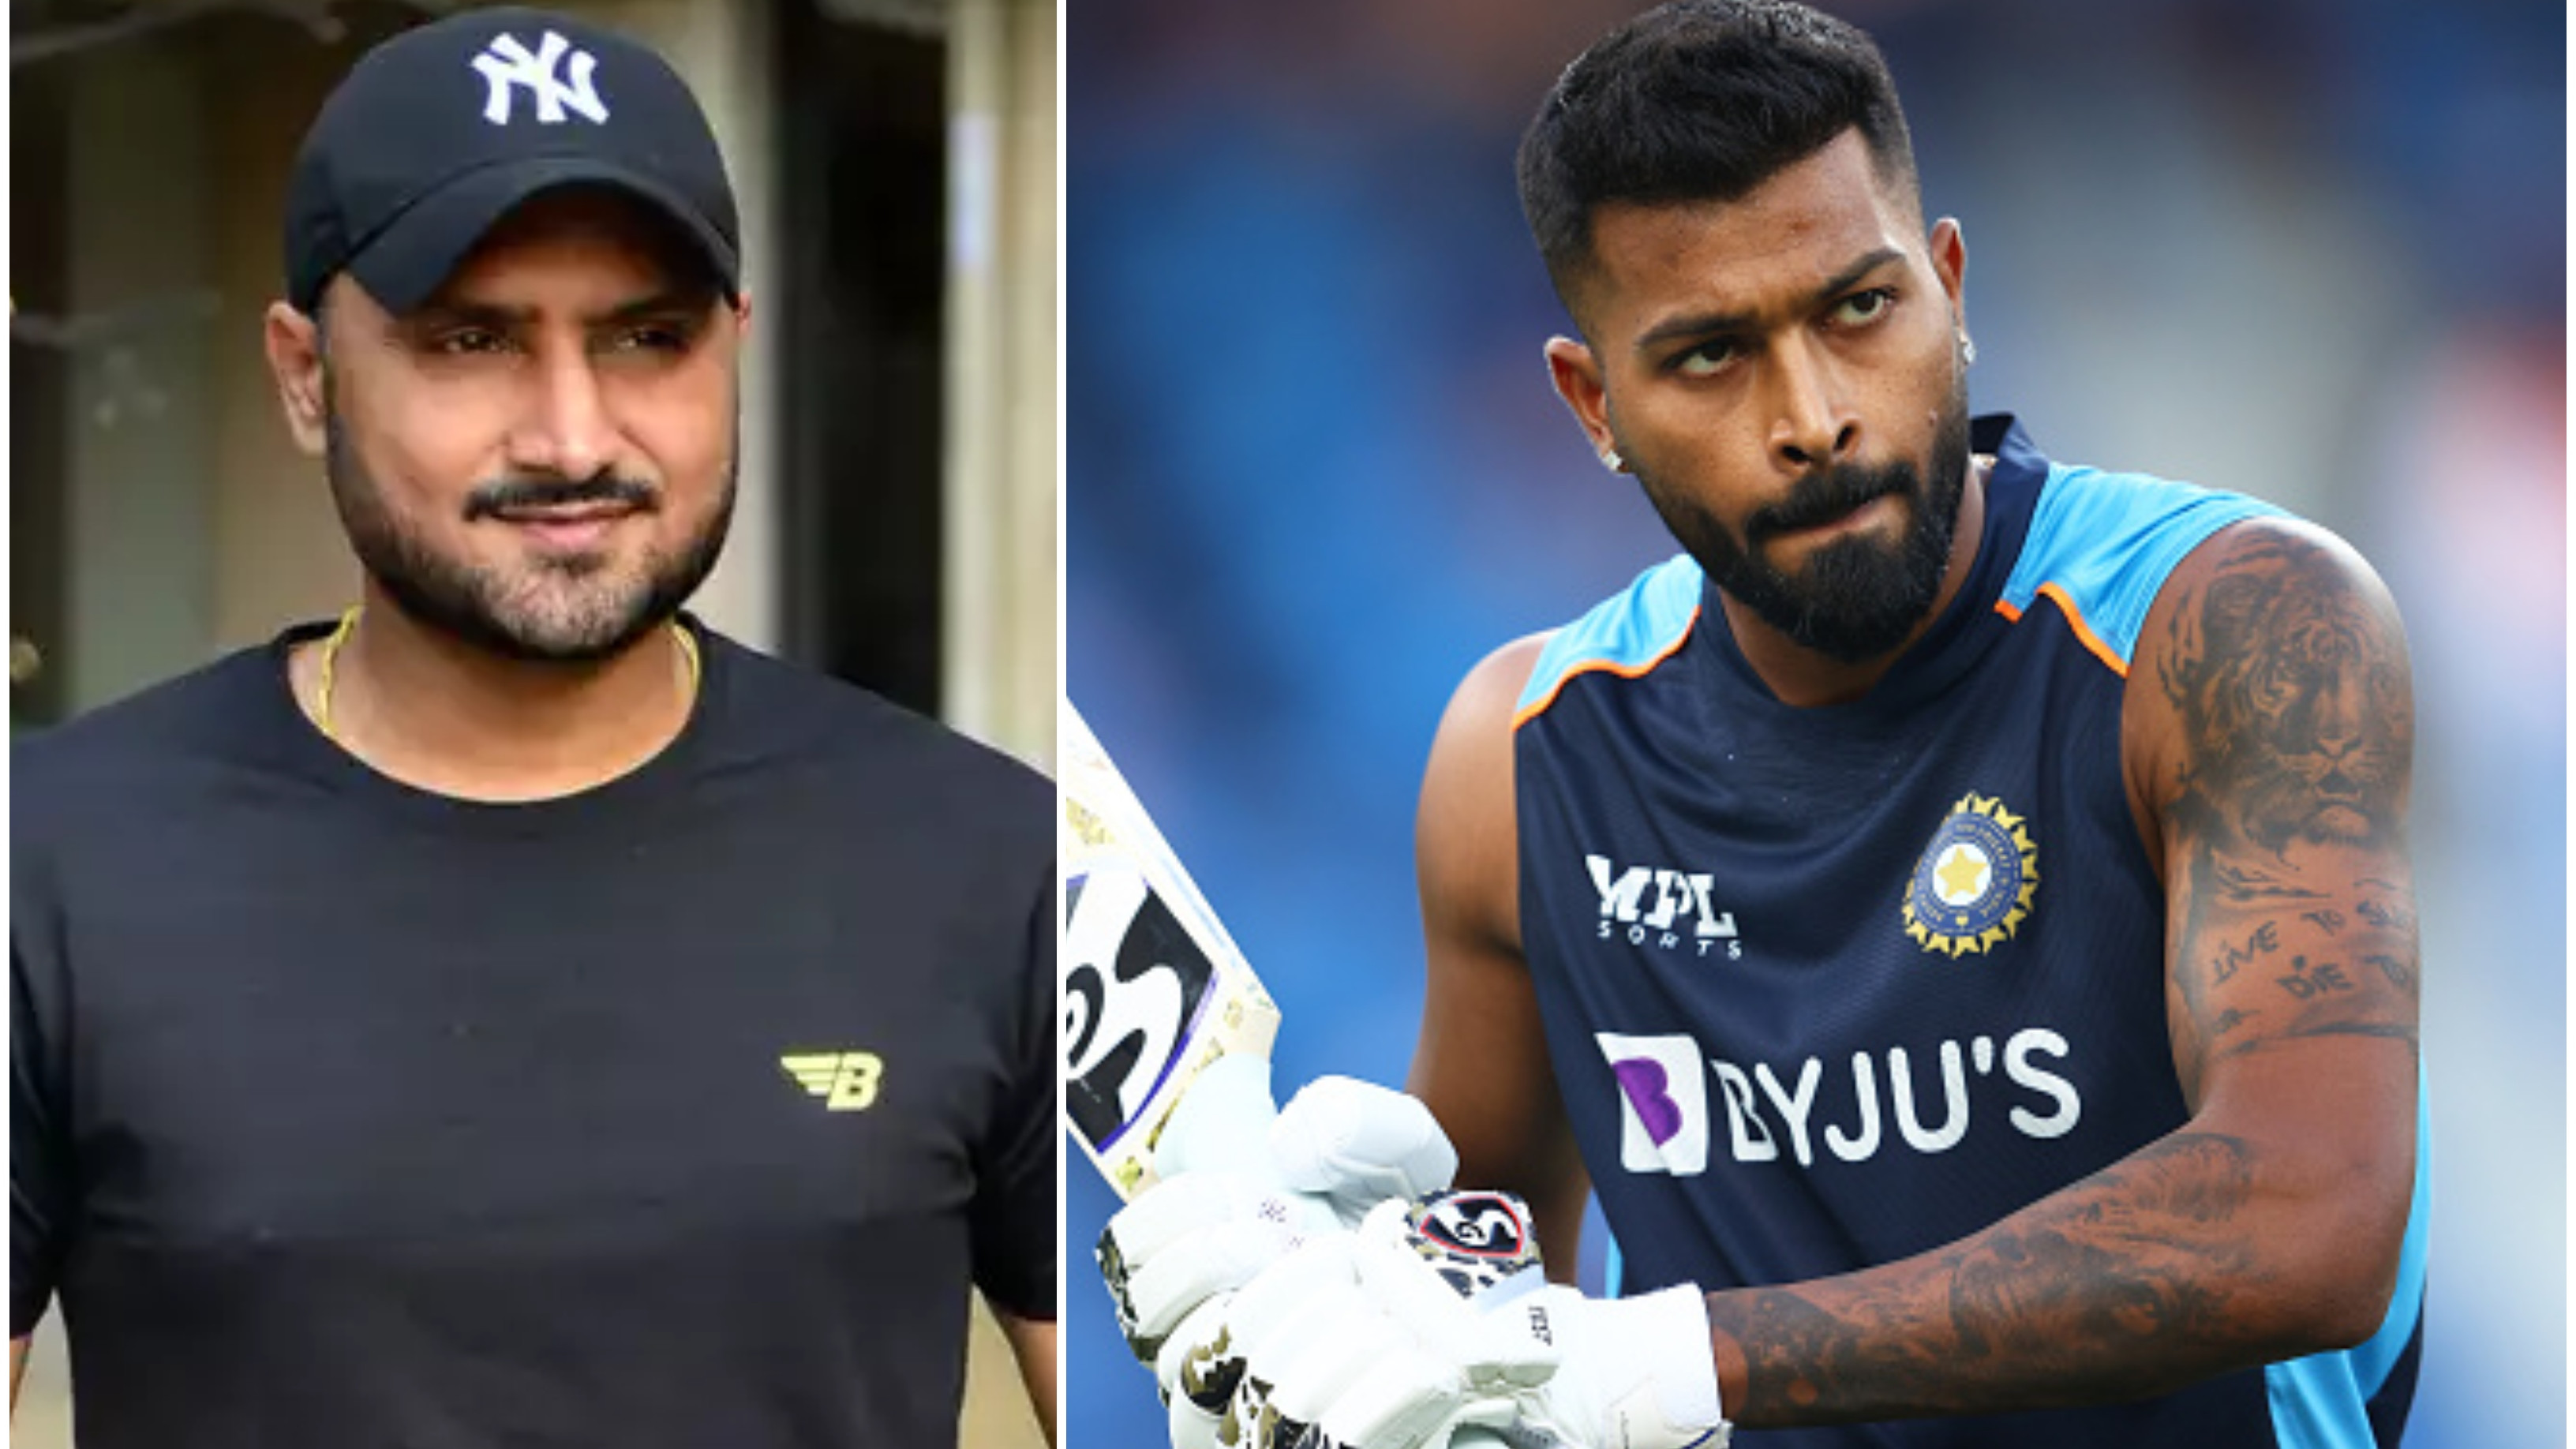 IND v SA 2022: Harbhajan impressed with Pandya’s captaincy in IPL, says he can lead Team India in future